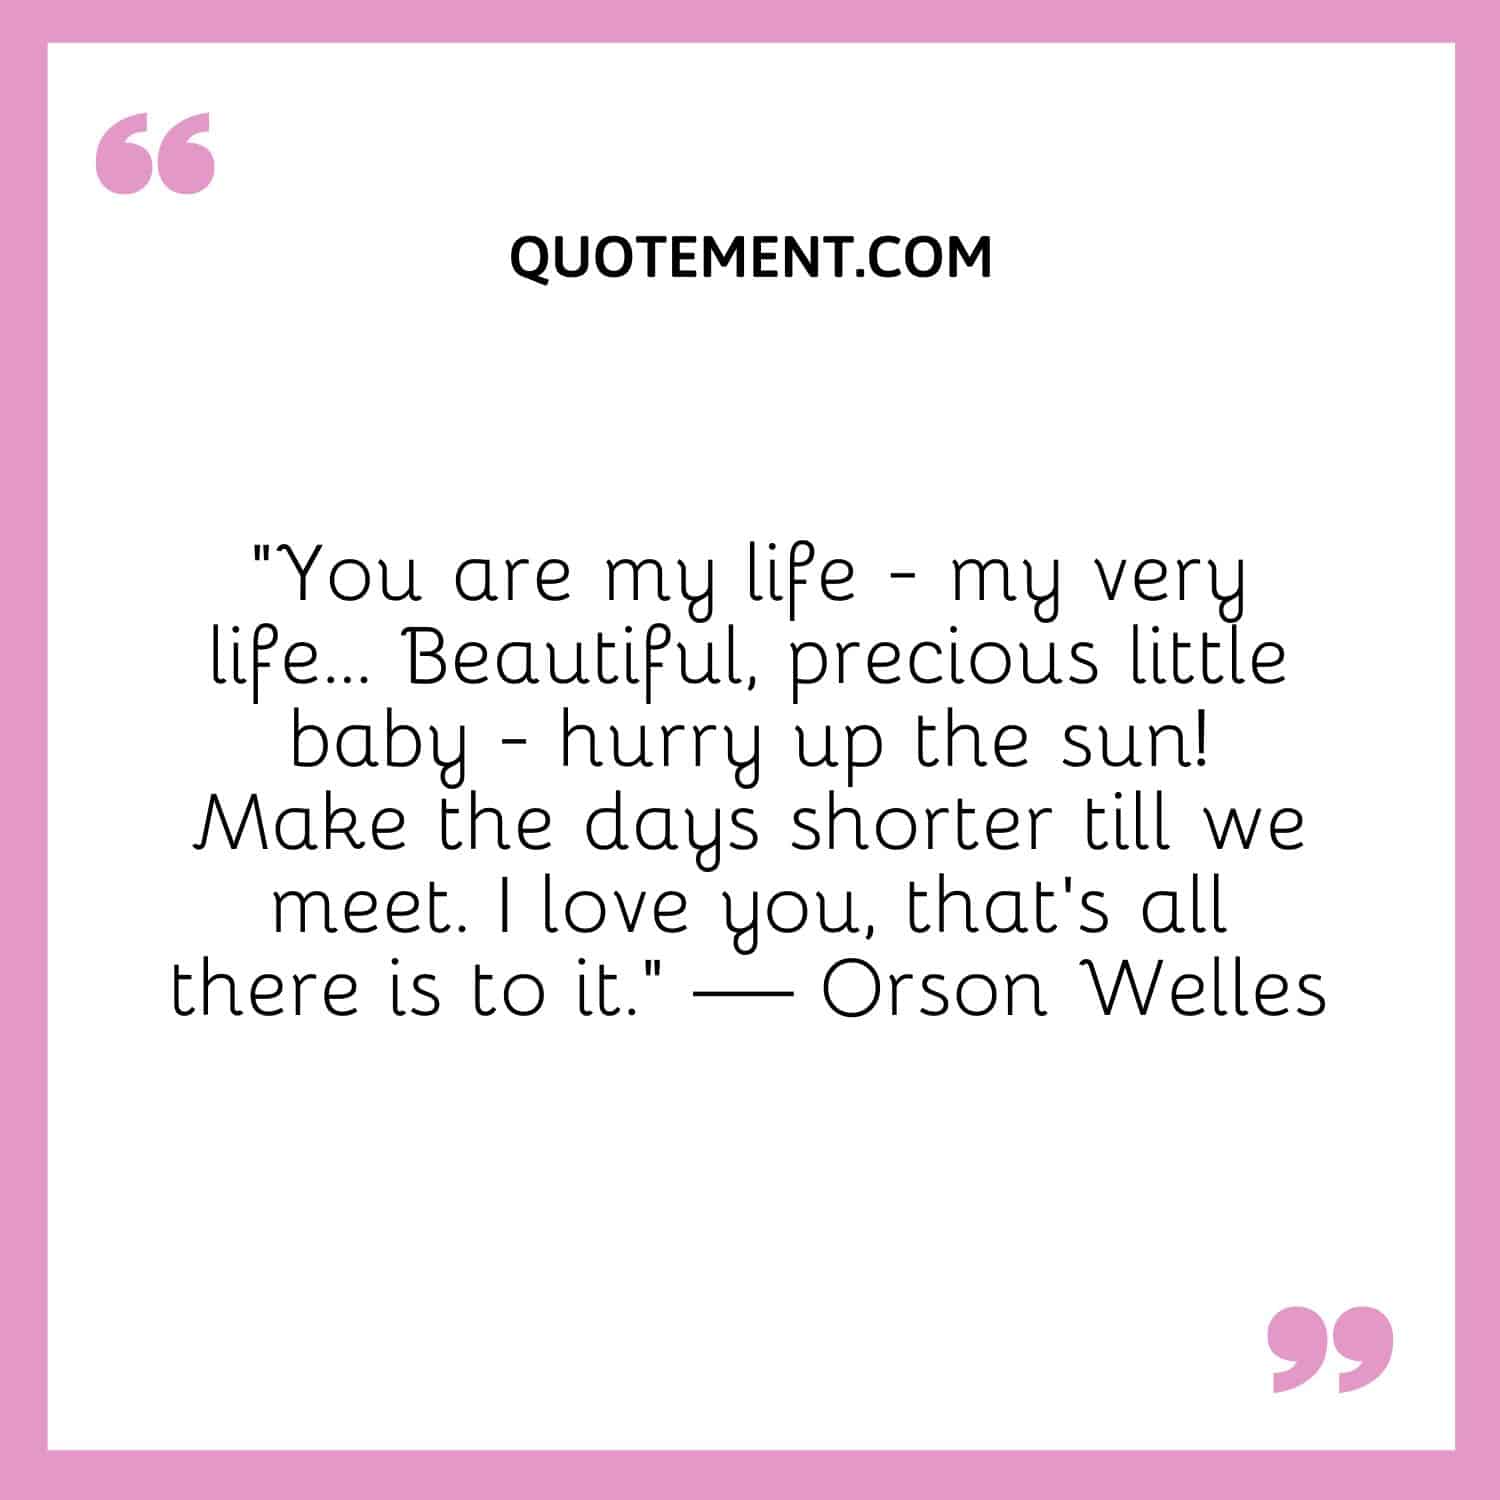 You are my life - my very life… Beautiful, precious little baby - hurry up the sun! Make the days shorter till we meet. I love you, that’s all there is to it.